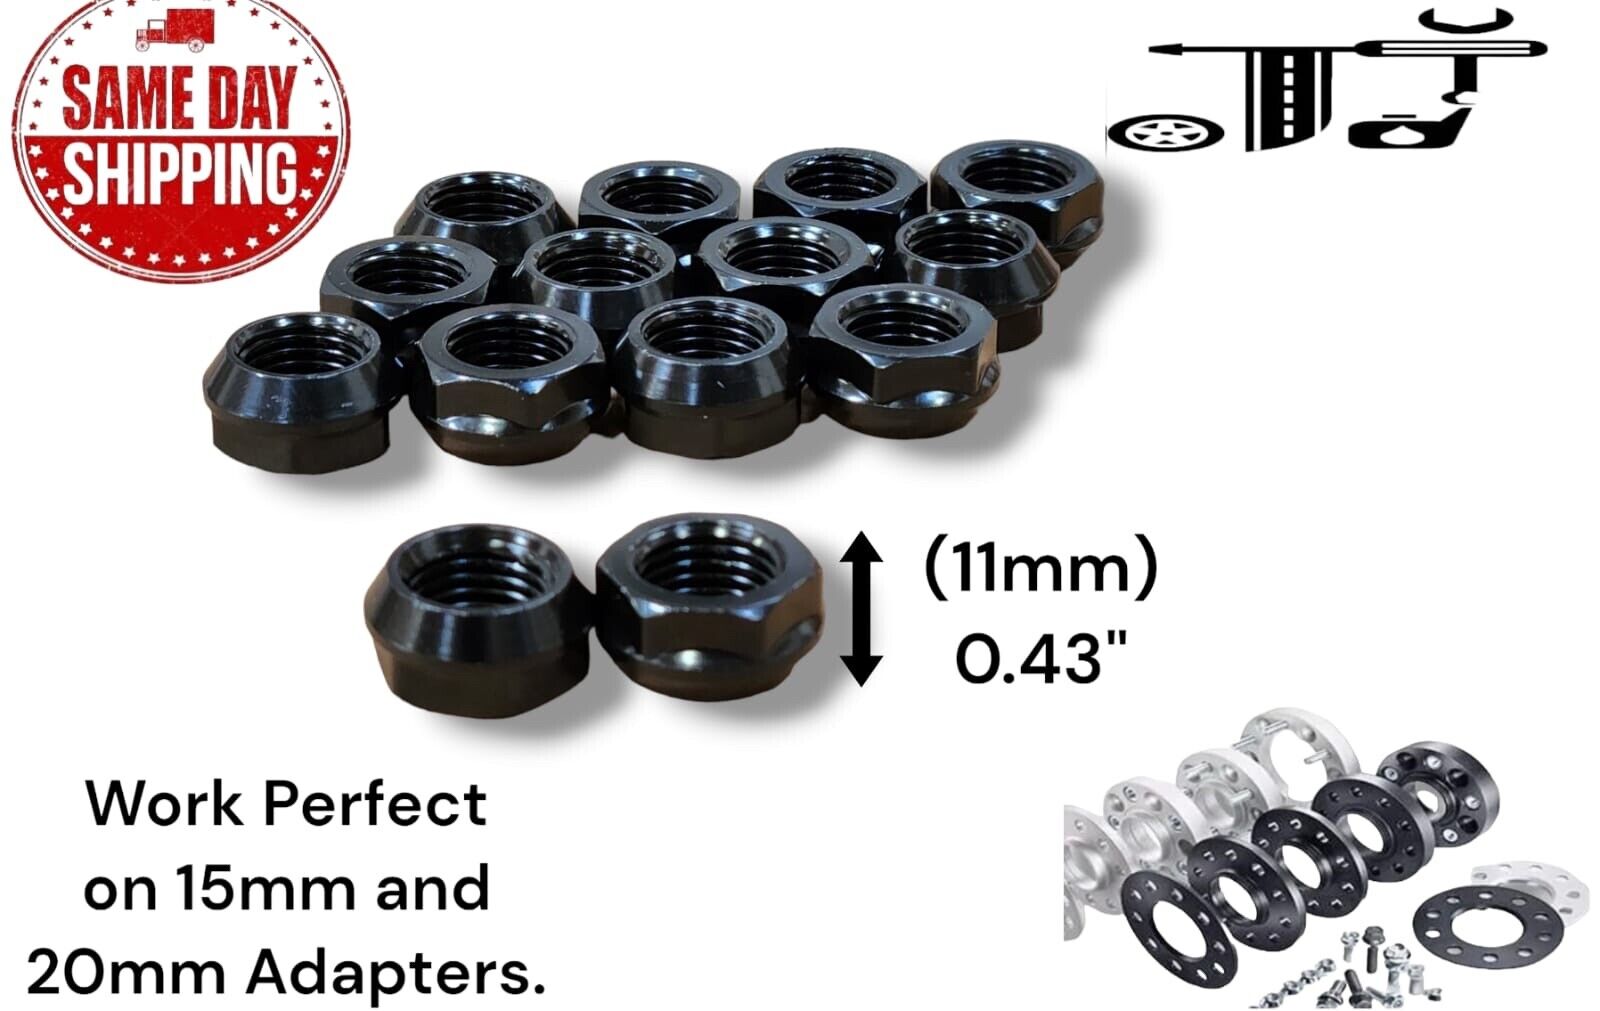 24 PCs BLACK 14X1.5 OPEN END BULGE ACORN LUG NUTS FOR 15MM OR 20MM ADAPTERS